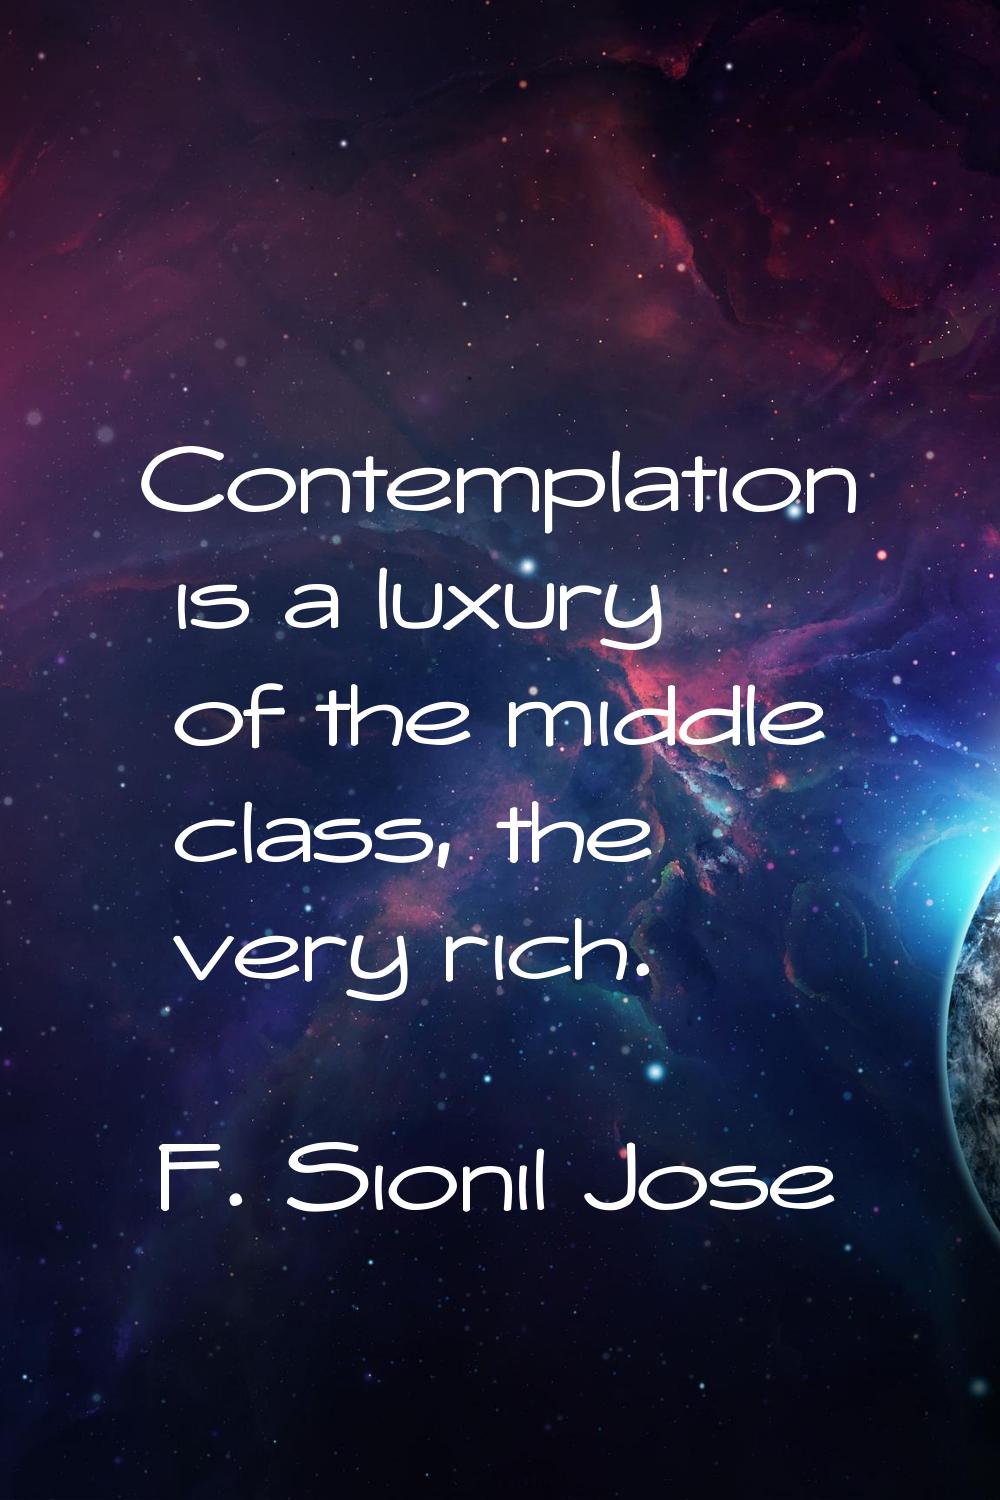 Contemplation is a luxury of the middle class, the very rich.